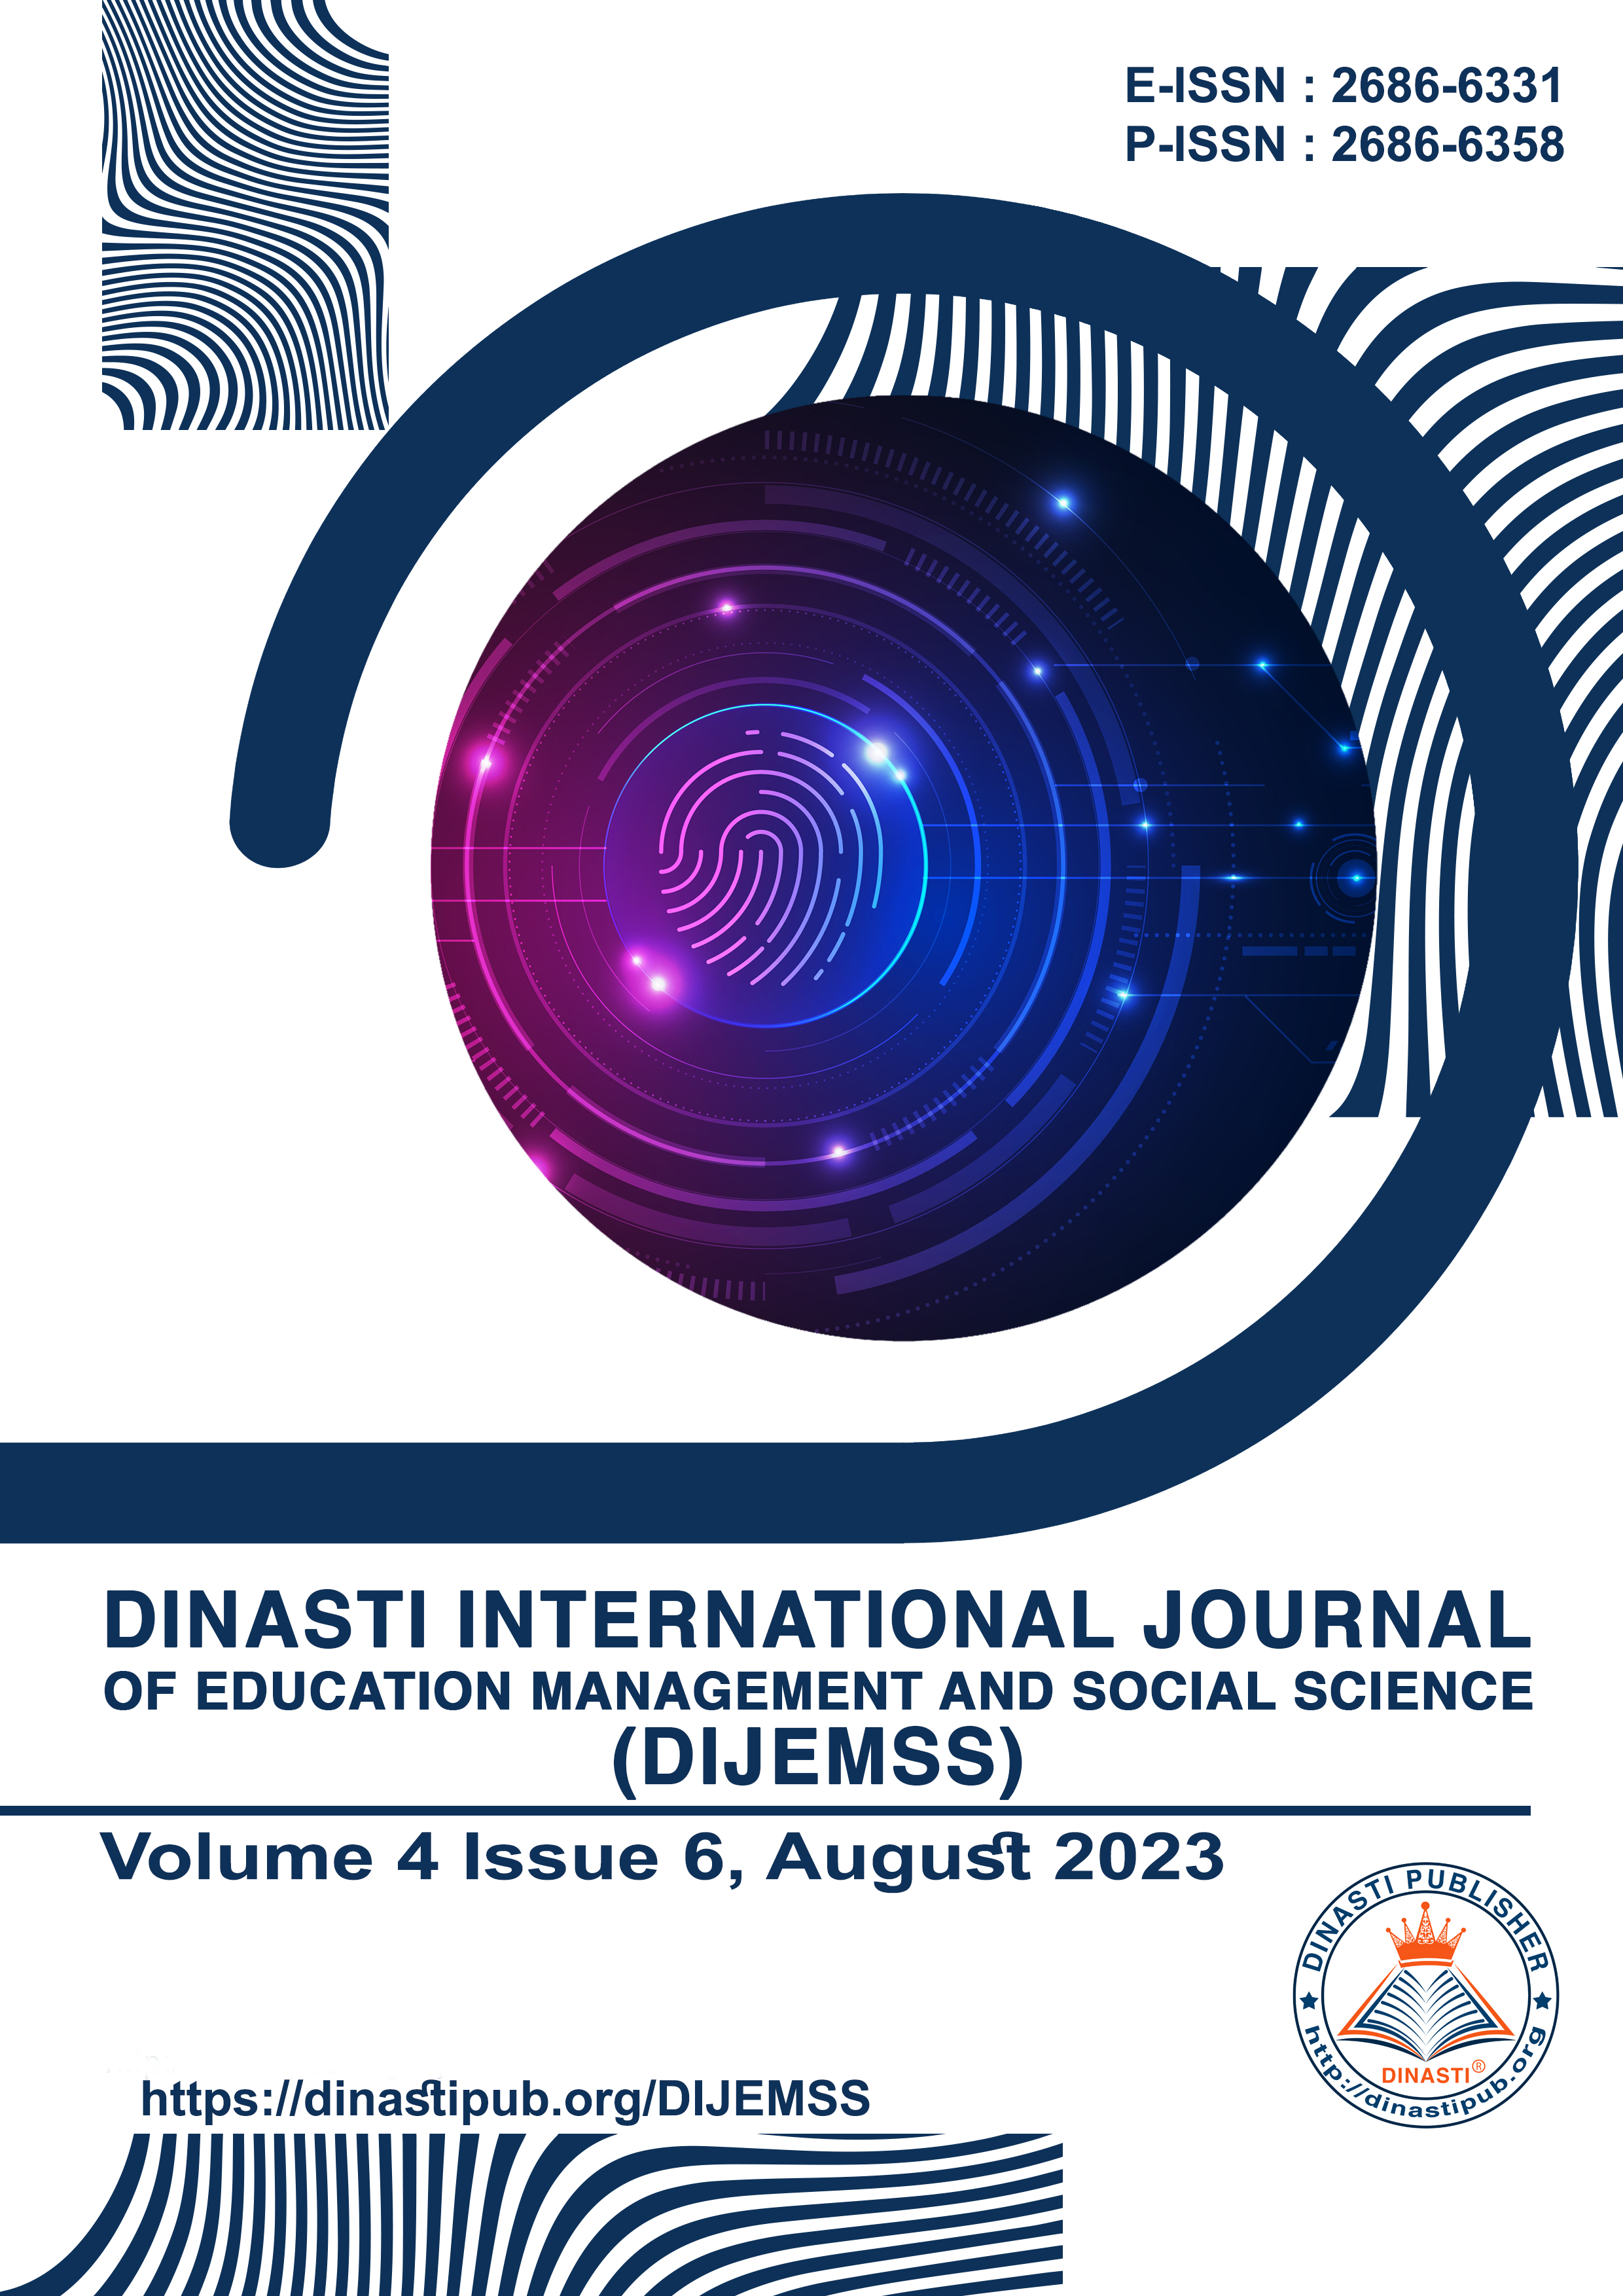 					View Vol. 4 No. 6 (2023): Dinasti International Journal of Education Management and Social Science (August - September 2023)
				